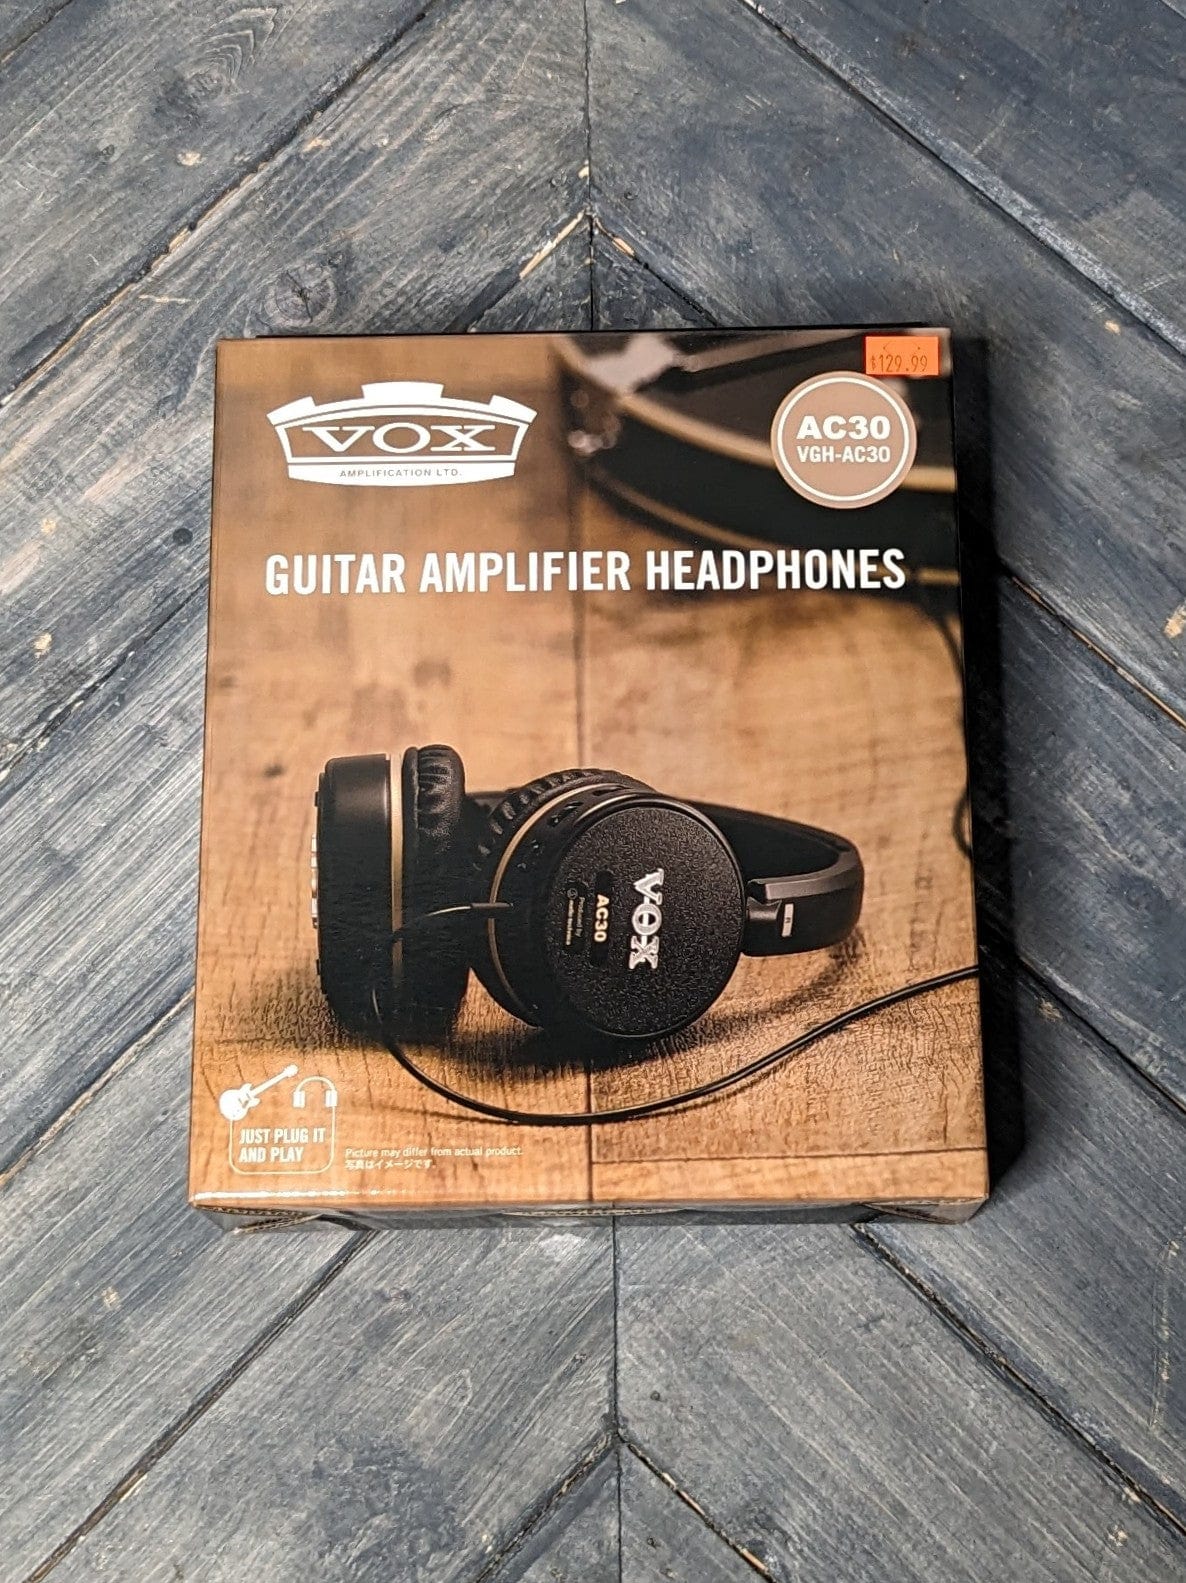 Vox VGH AC30 Headphone Amplifier front of the packaging